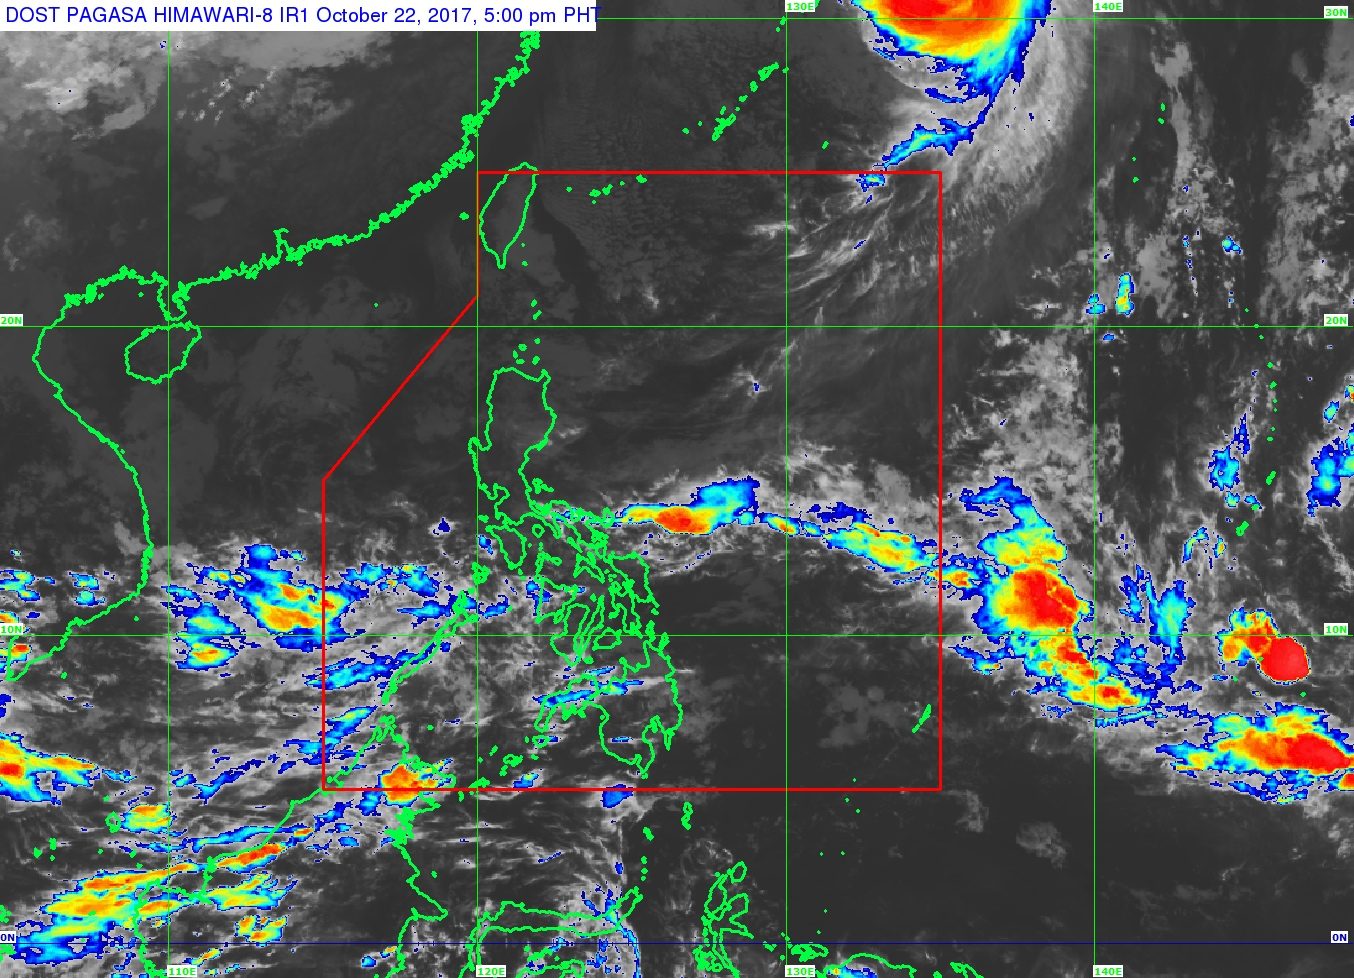 Moderate-heavy rain in parts of PH on Monday